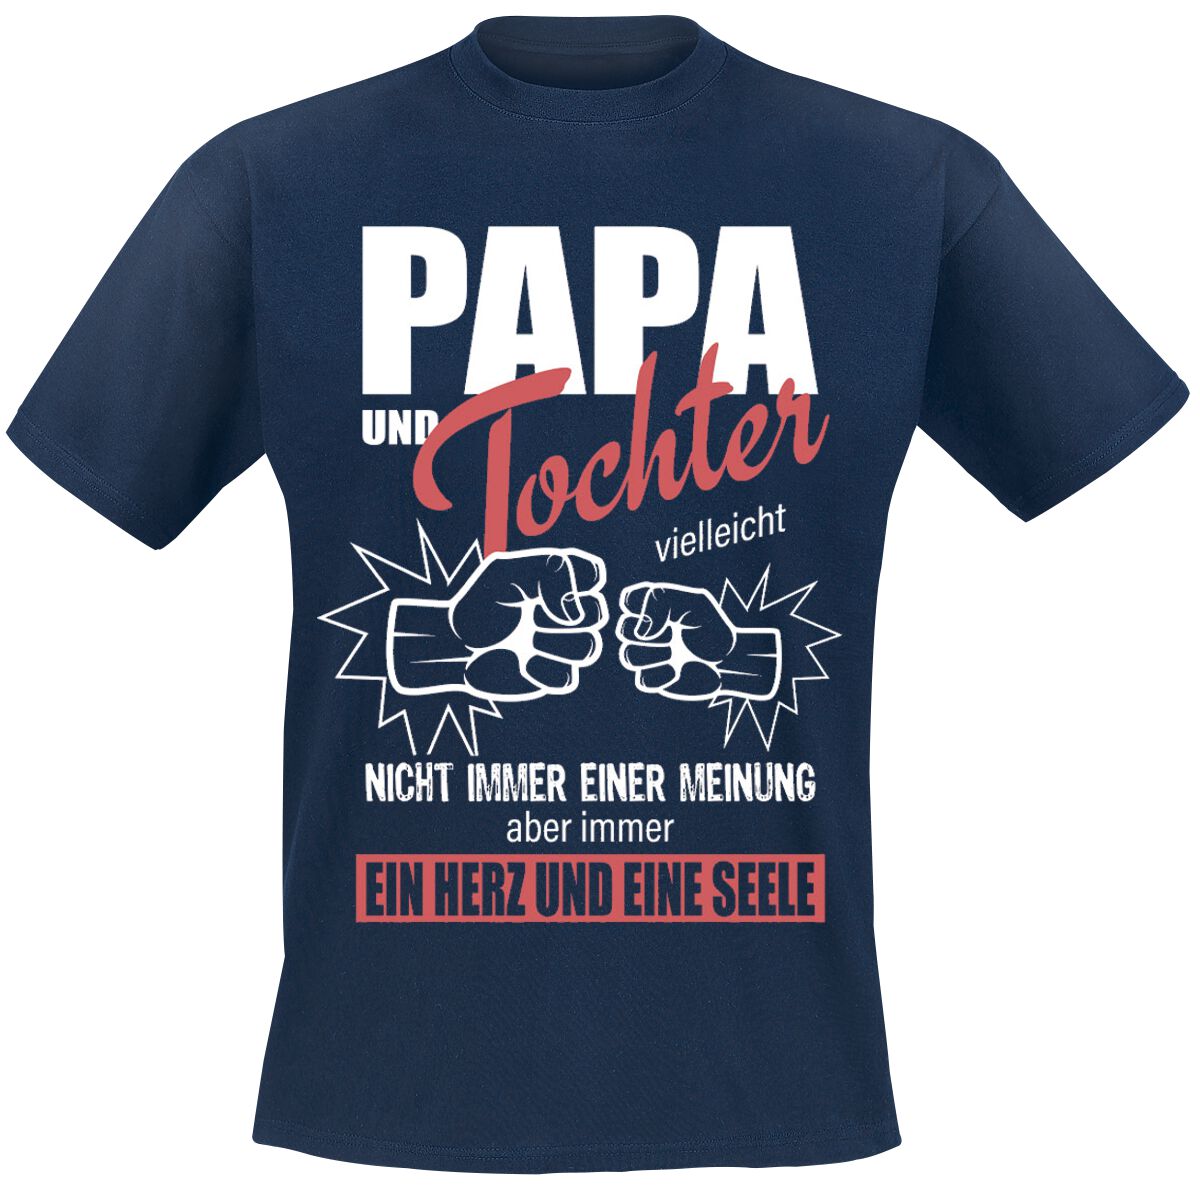 Familie & Freunde Family & Baby - Papa & Tochter T-Shirt navy in XXL